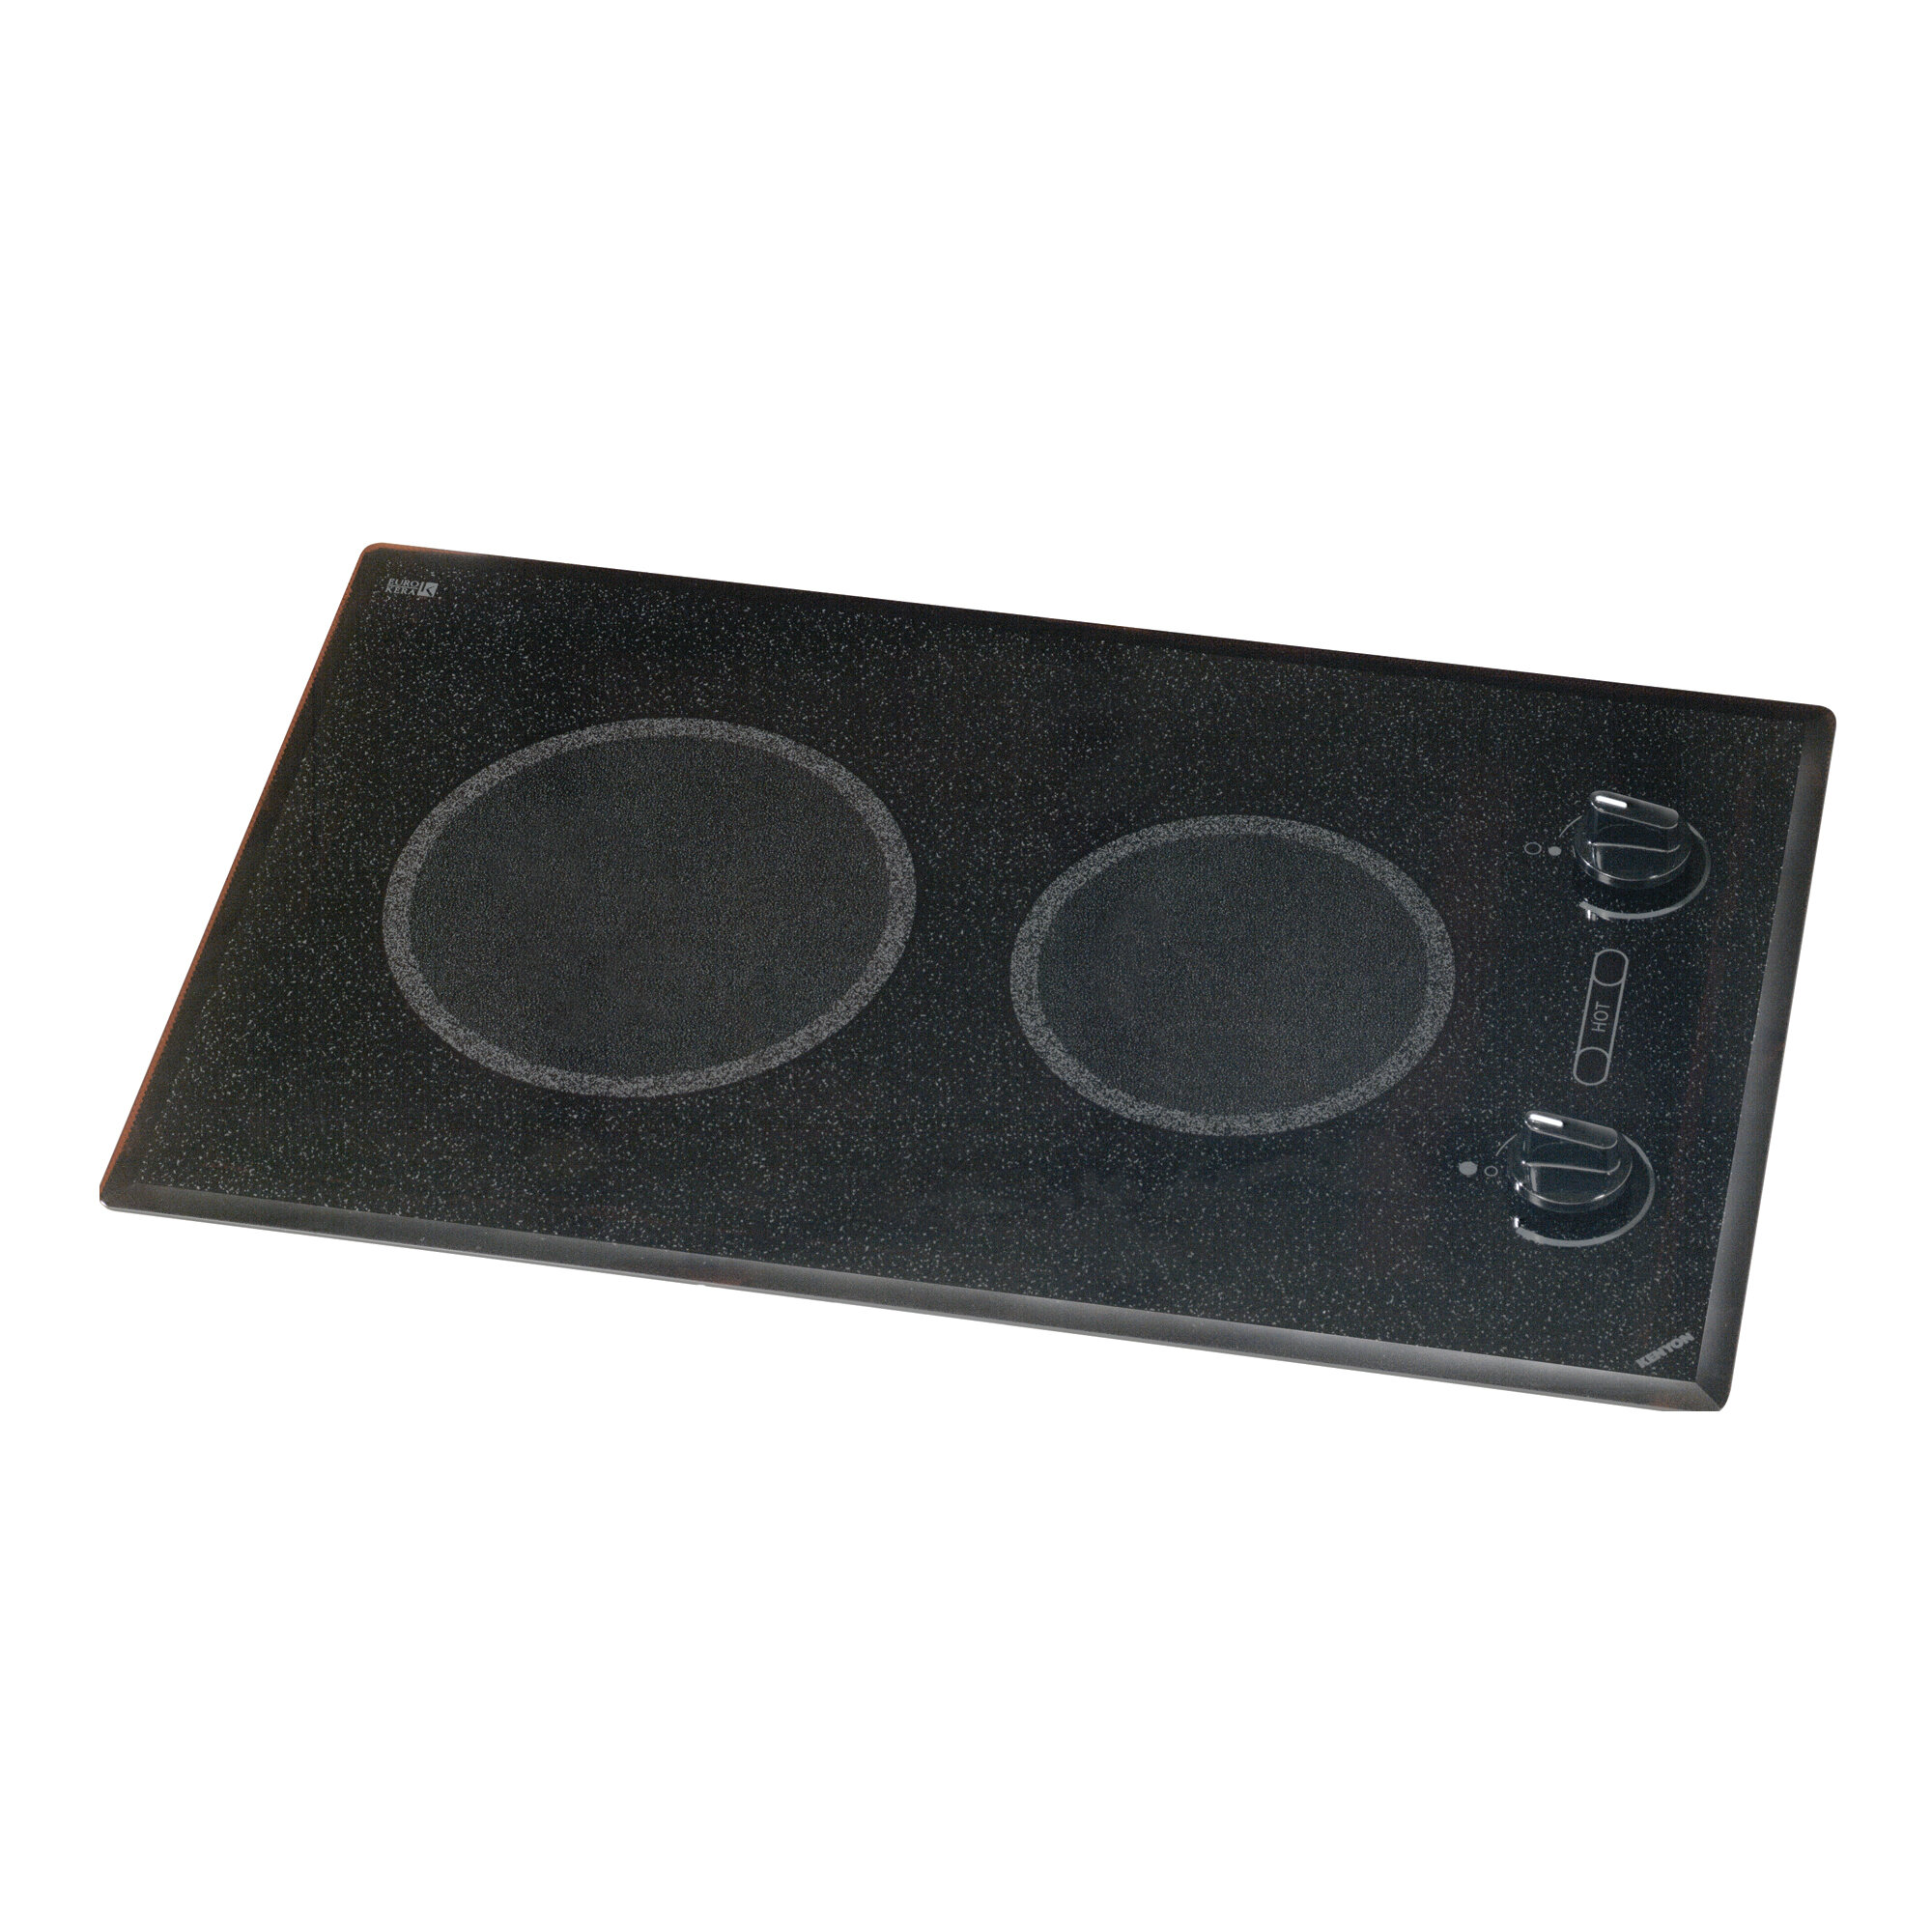 Double Electric Cooktop, 120V 2400W 24 Inch Built-in Electric